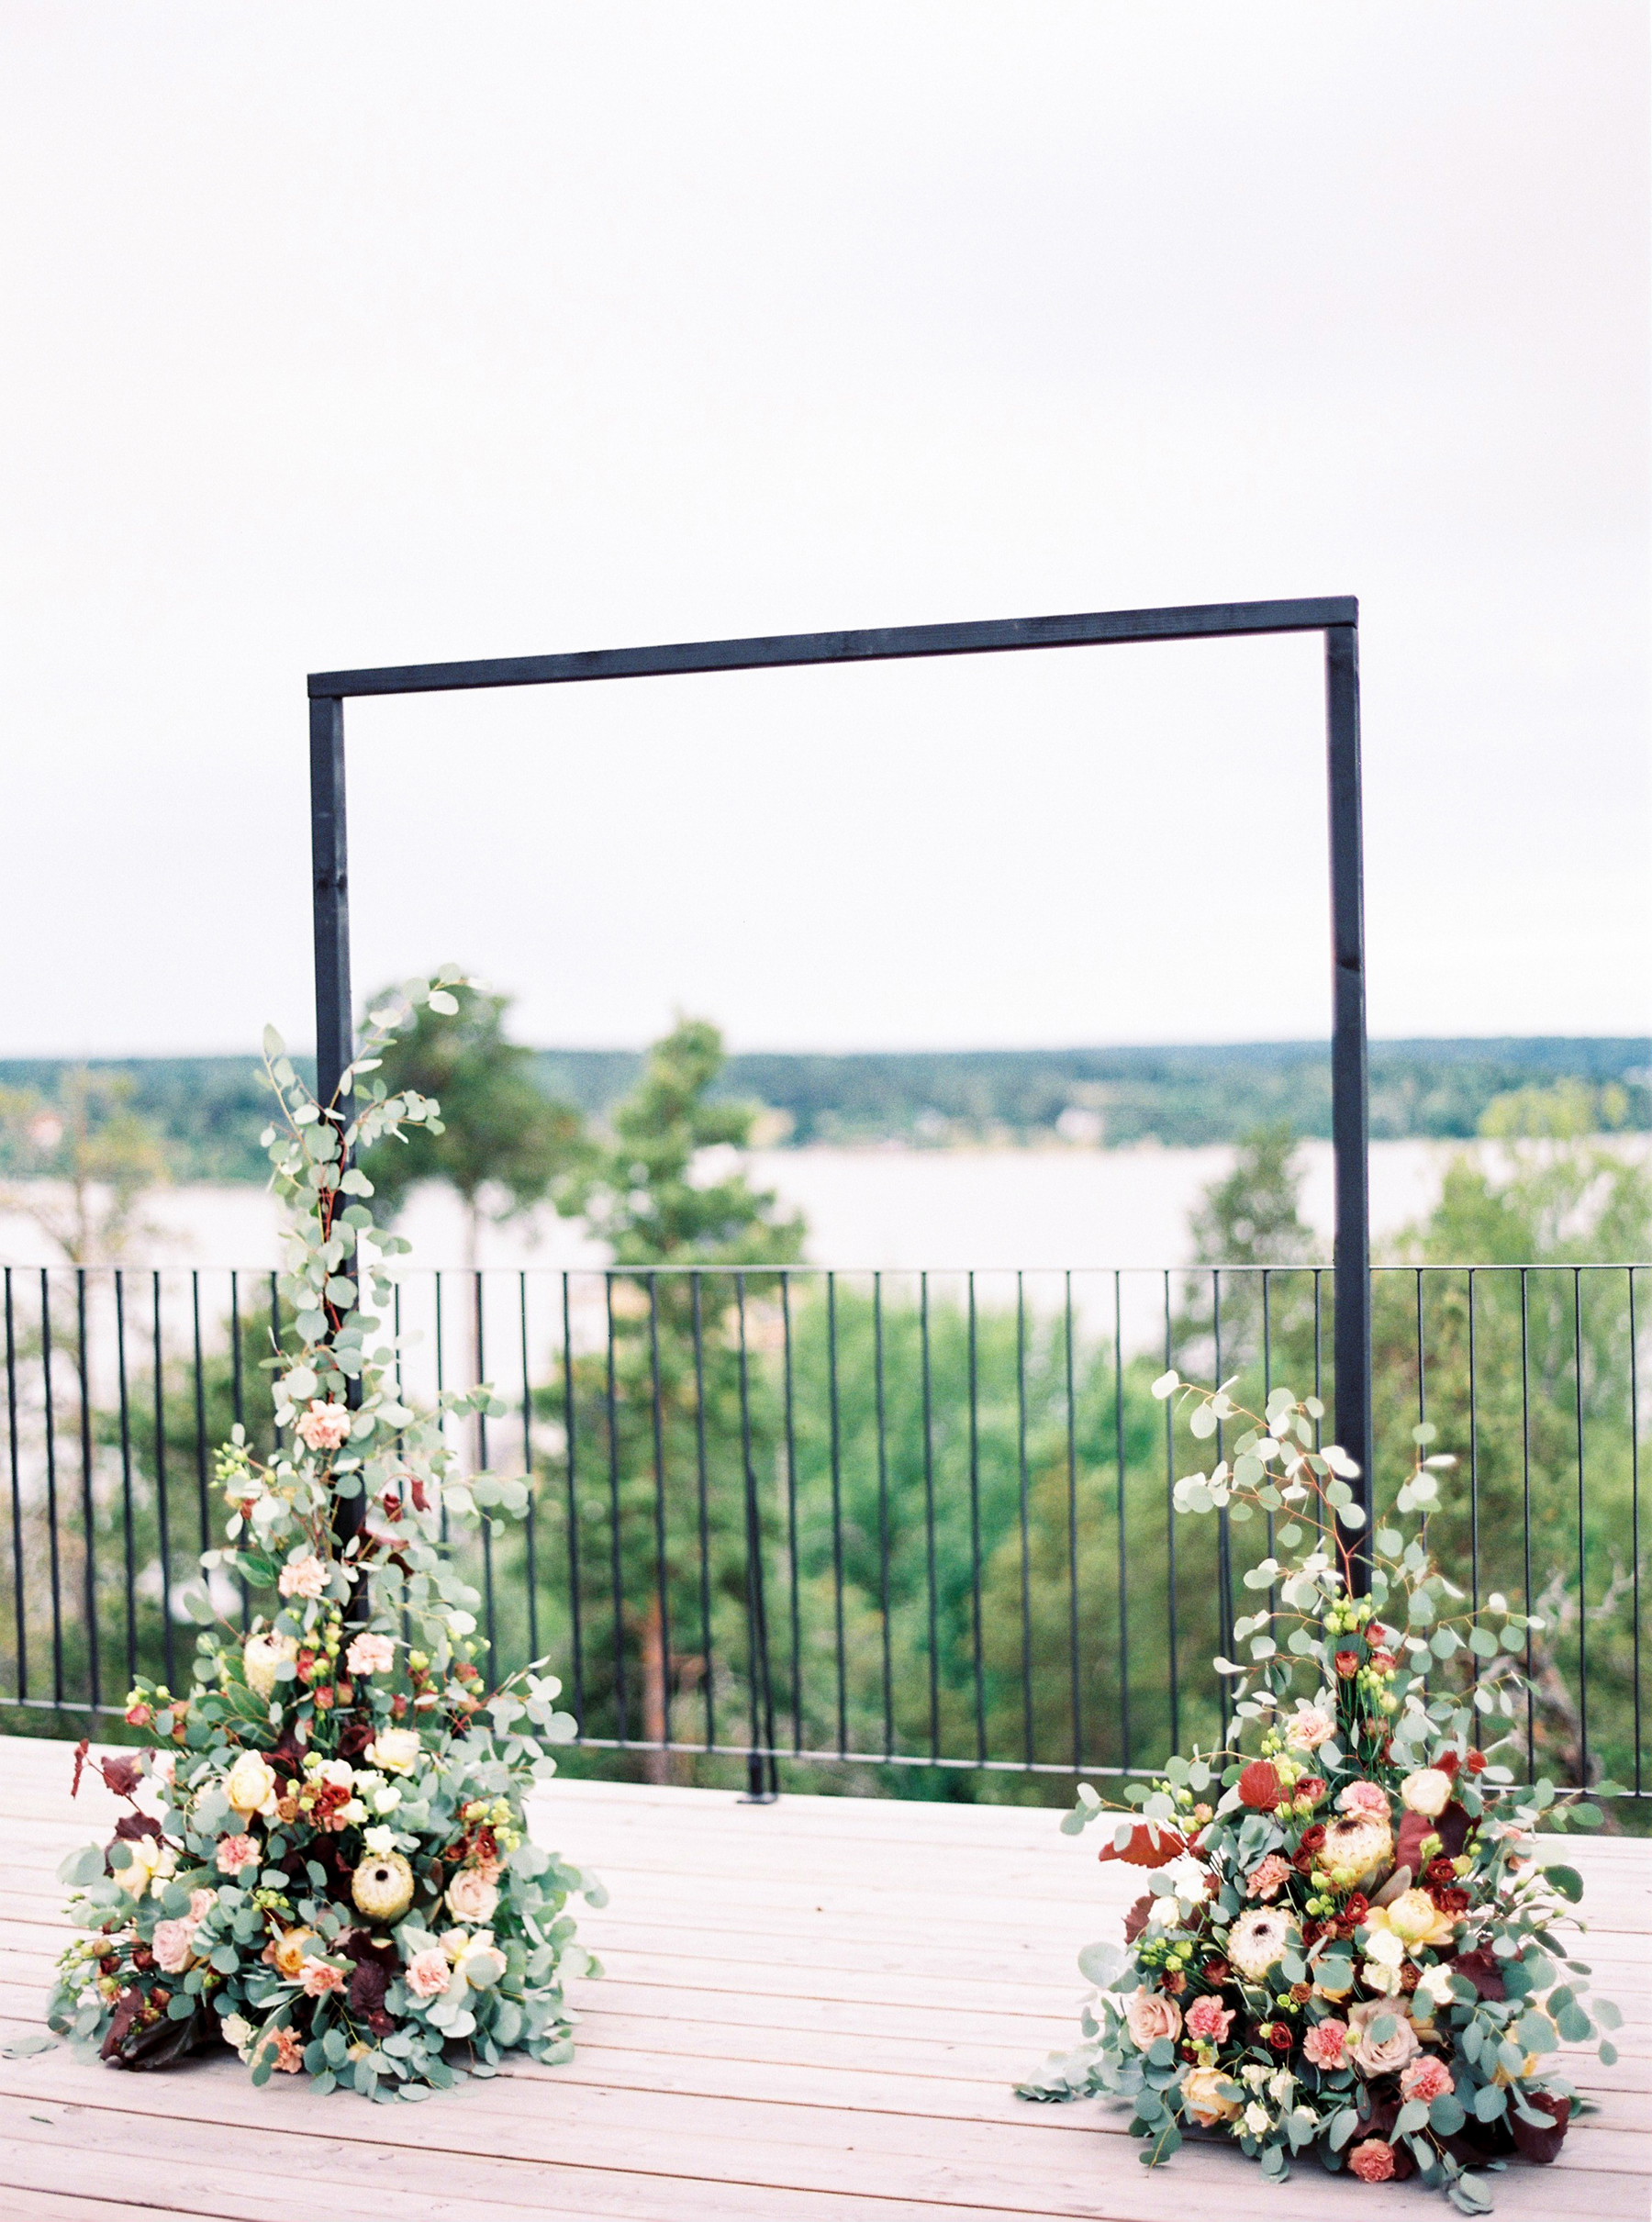 Bright and Warm Colored Wedding Inspiration in Sweden 2 Brides Photography02